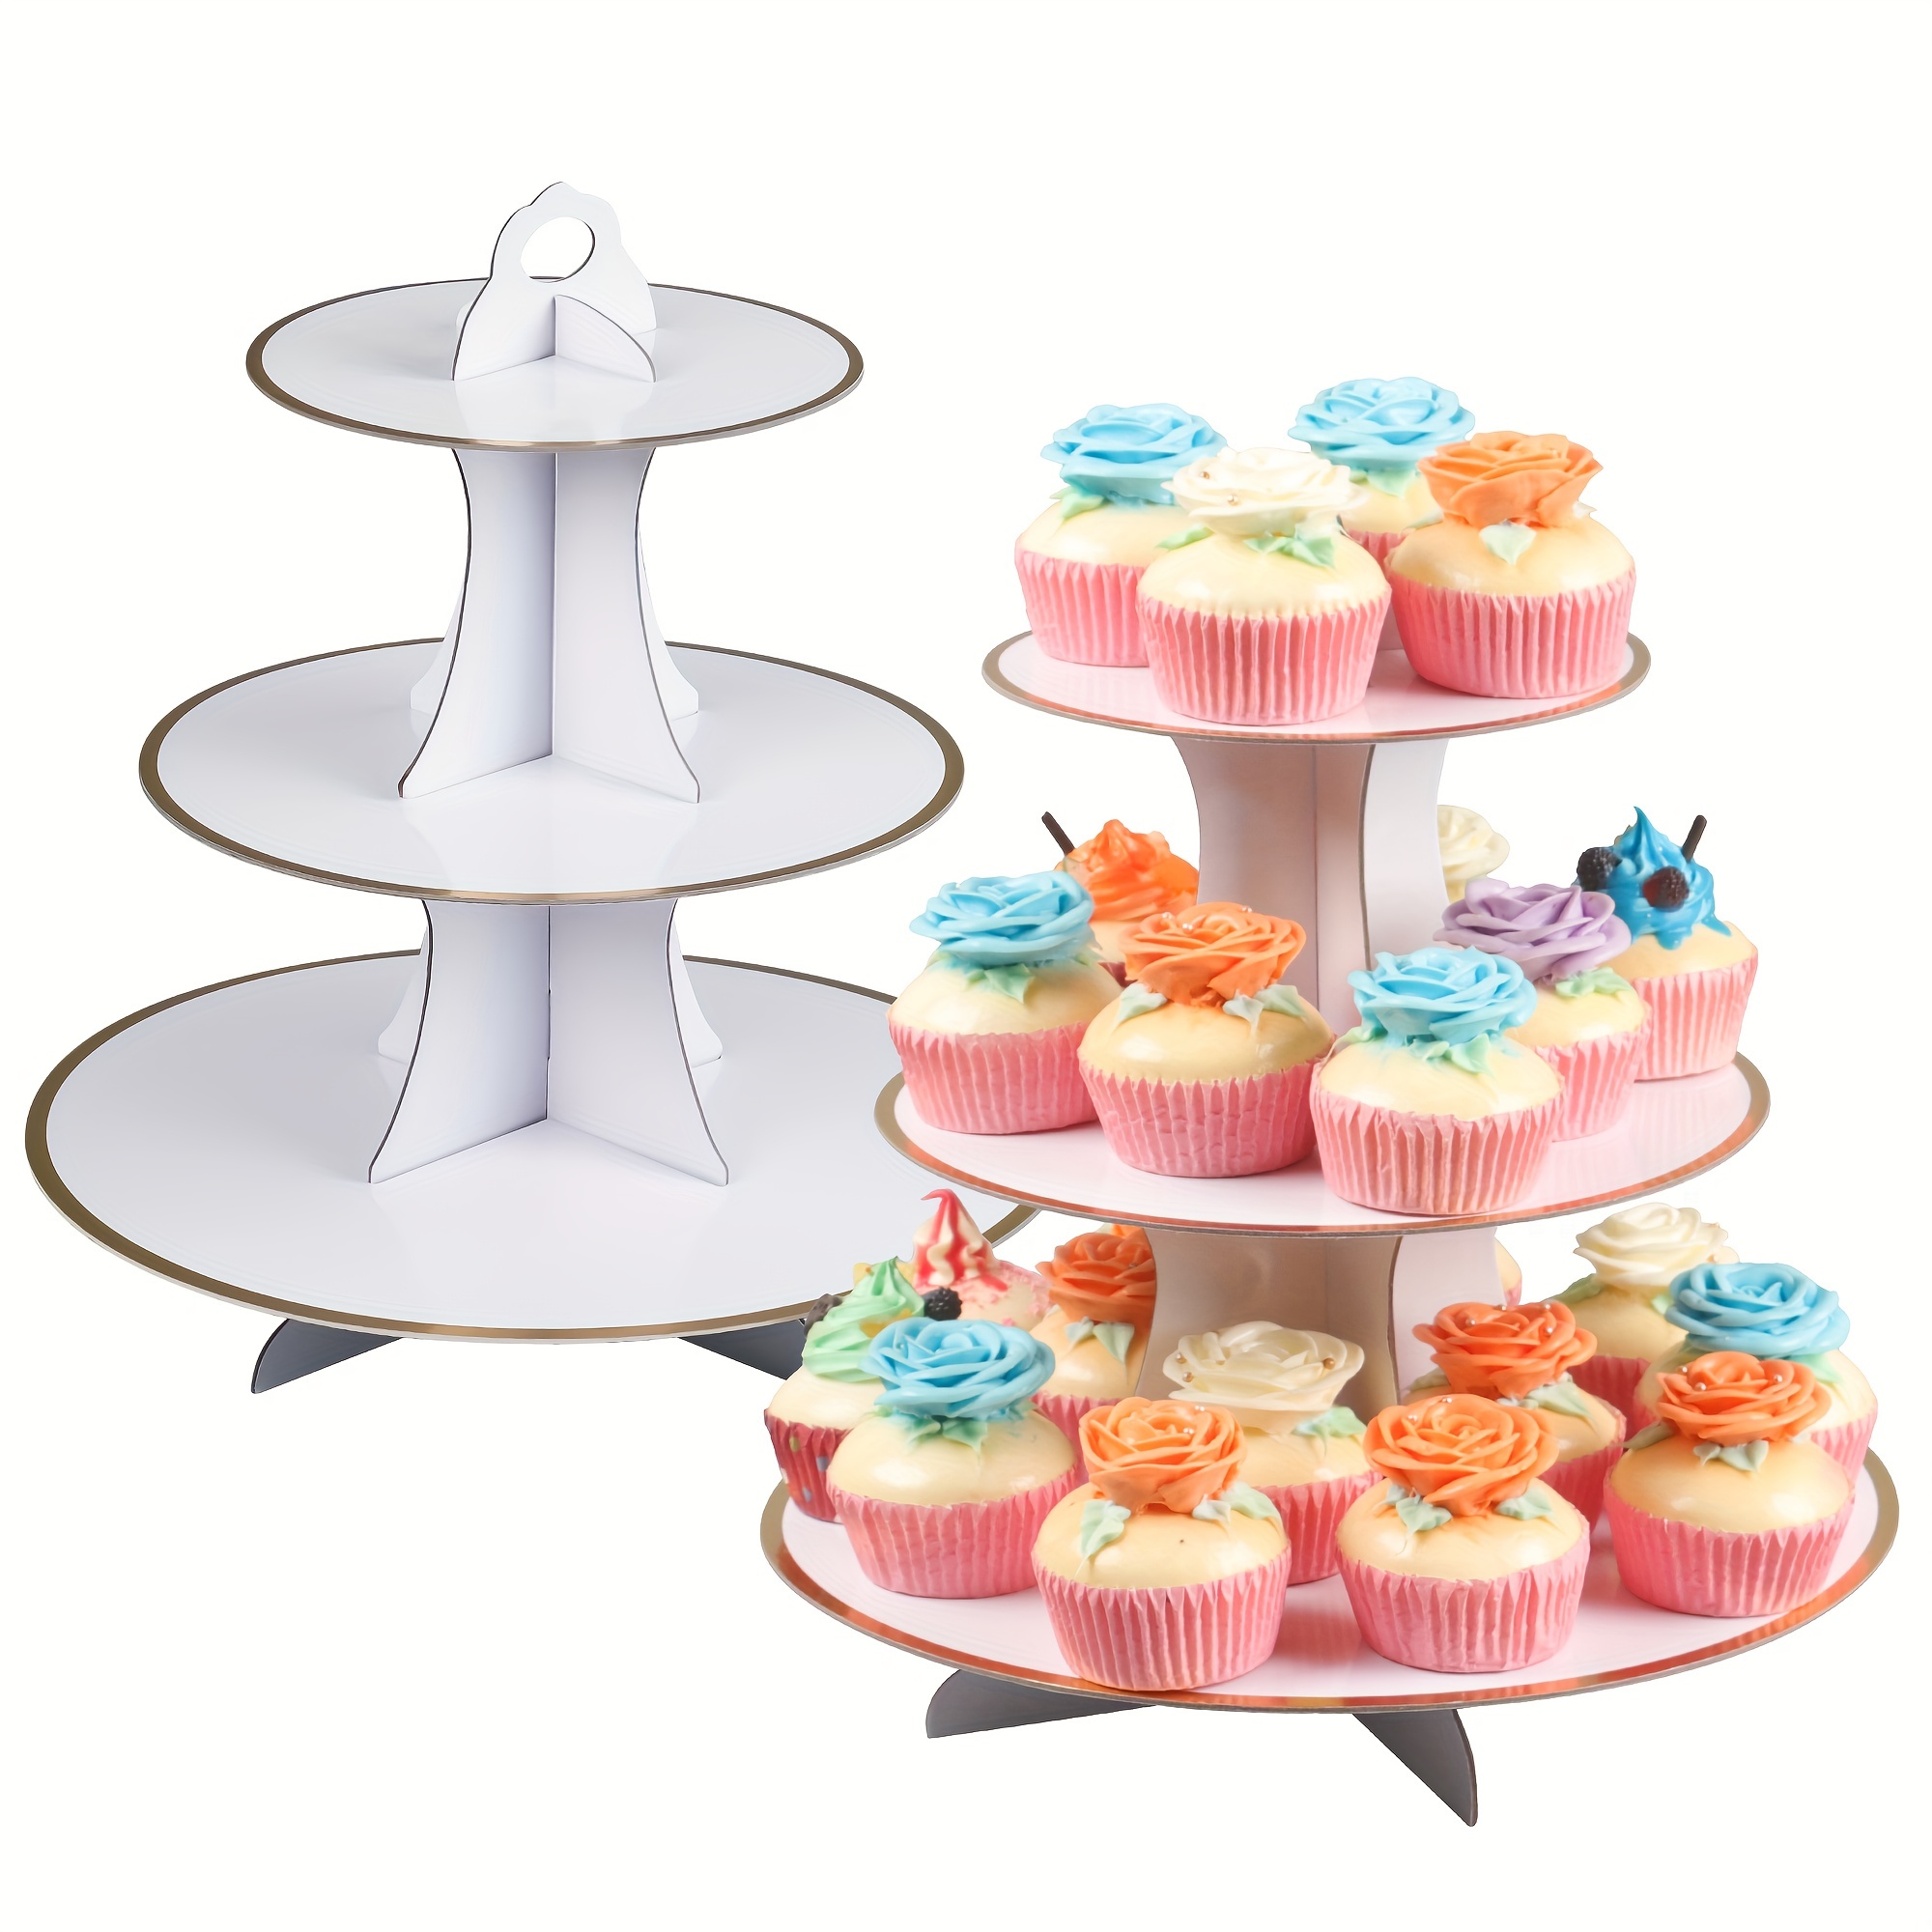 2set, Gone Fishing Party Supply Cupcake Stand 3 Tire Round Cardboard  Fishing Cupcake Stand Dessert Tower Holder Serving Stand For Gone Fishing  Themed